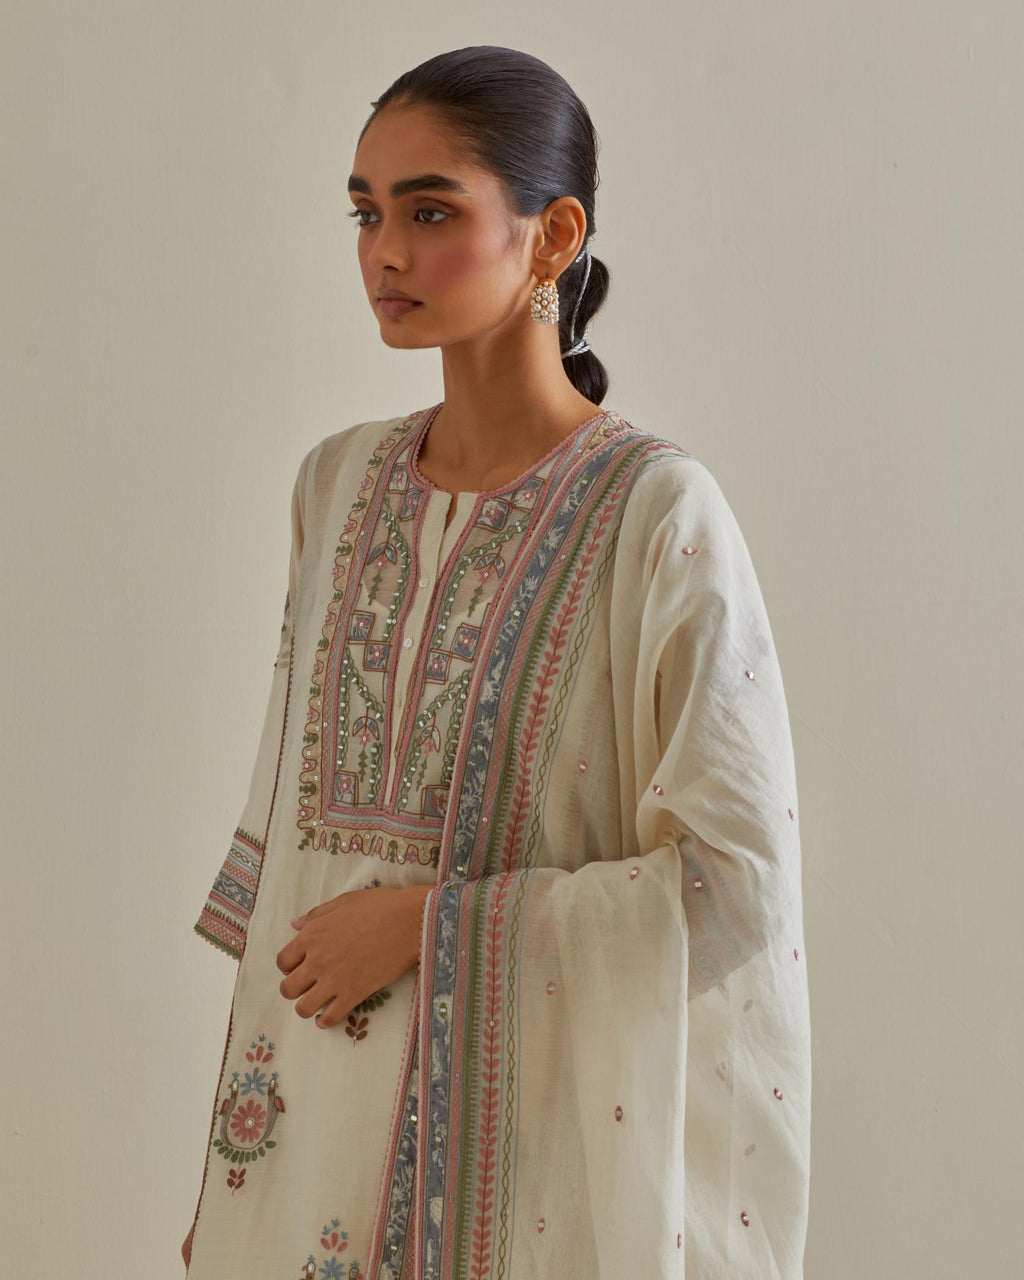 Pink and off-white cotton chanderi straight kurta set with yoke and side panels. It has allover patchwork and silk thread embroidery, highlighted with mirror, sequins, tassels and braids.